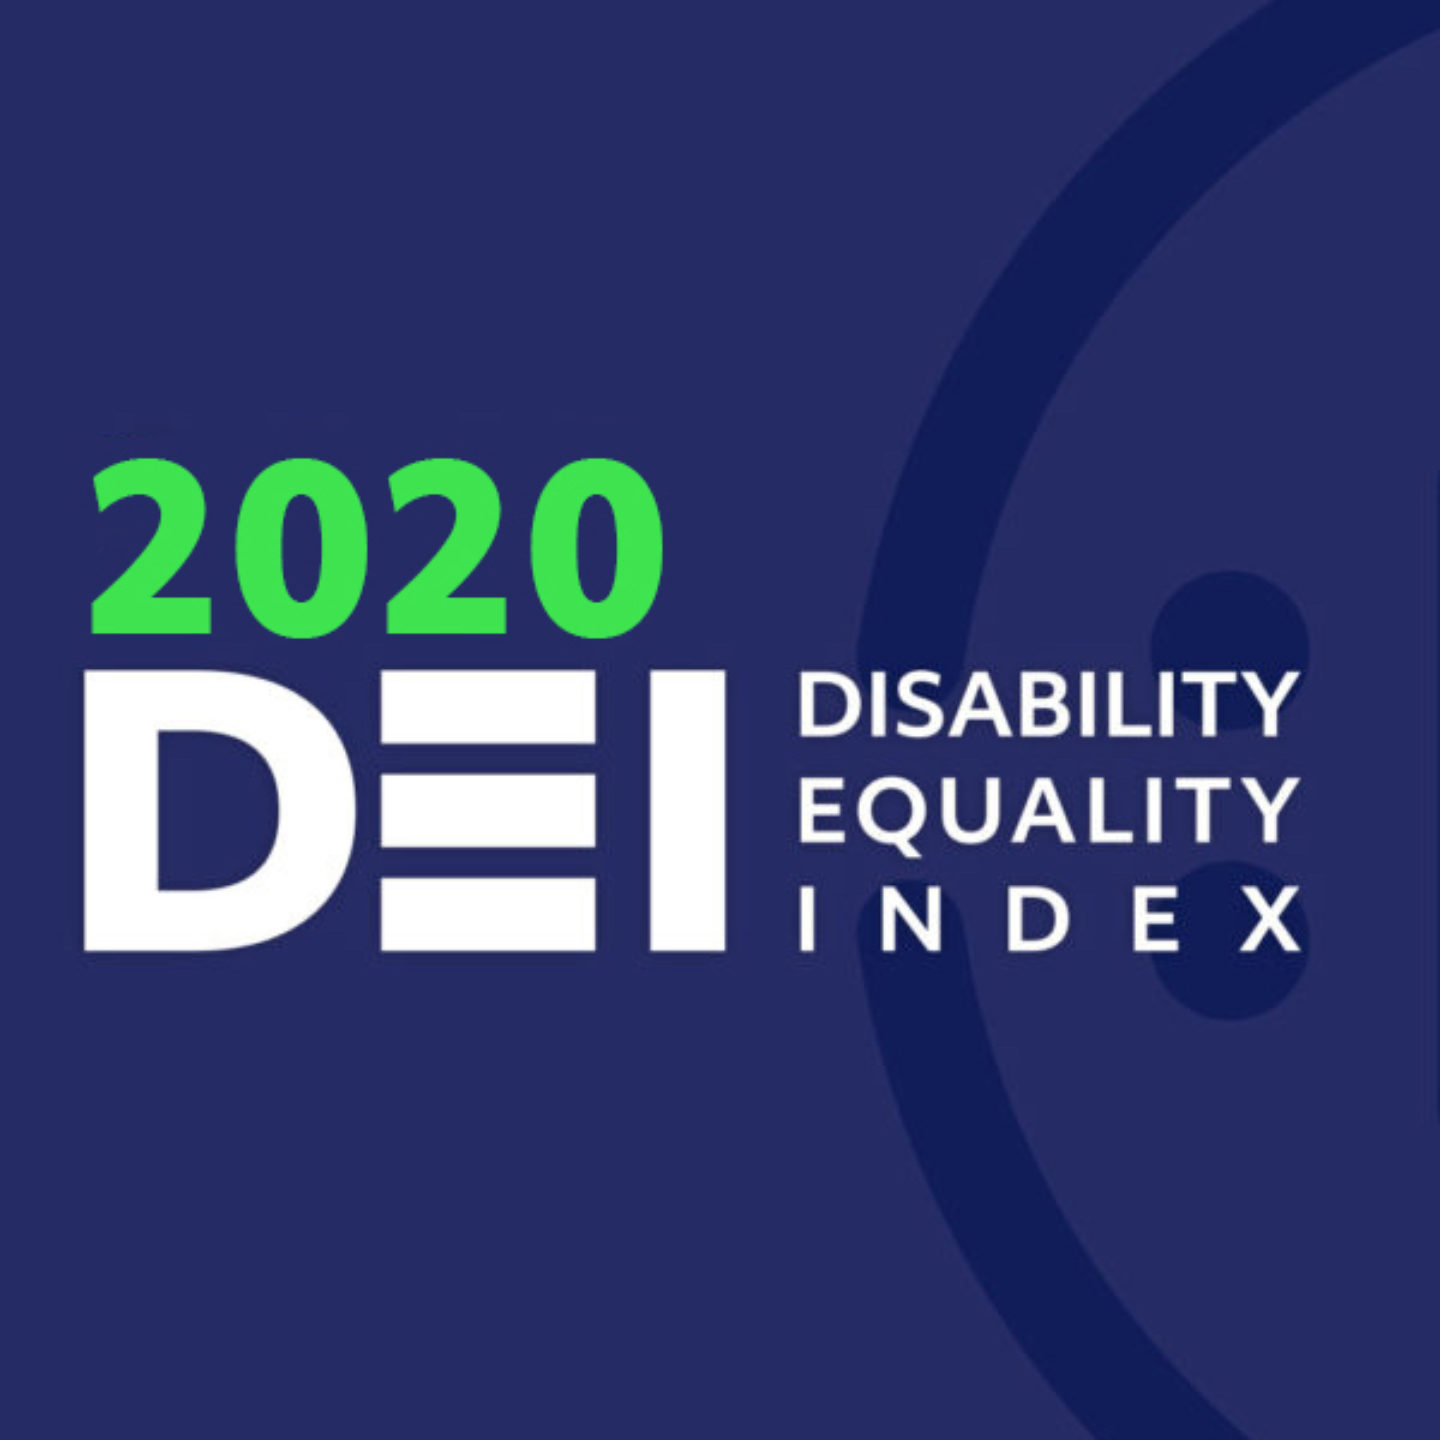 2020 Disability Equality Index logo on square report cover